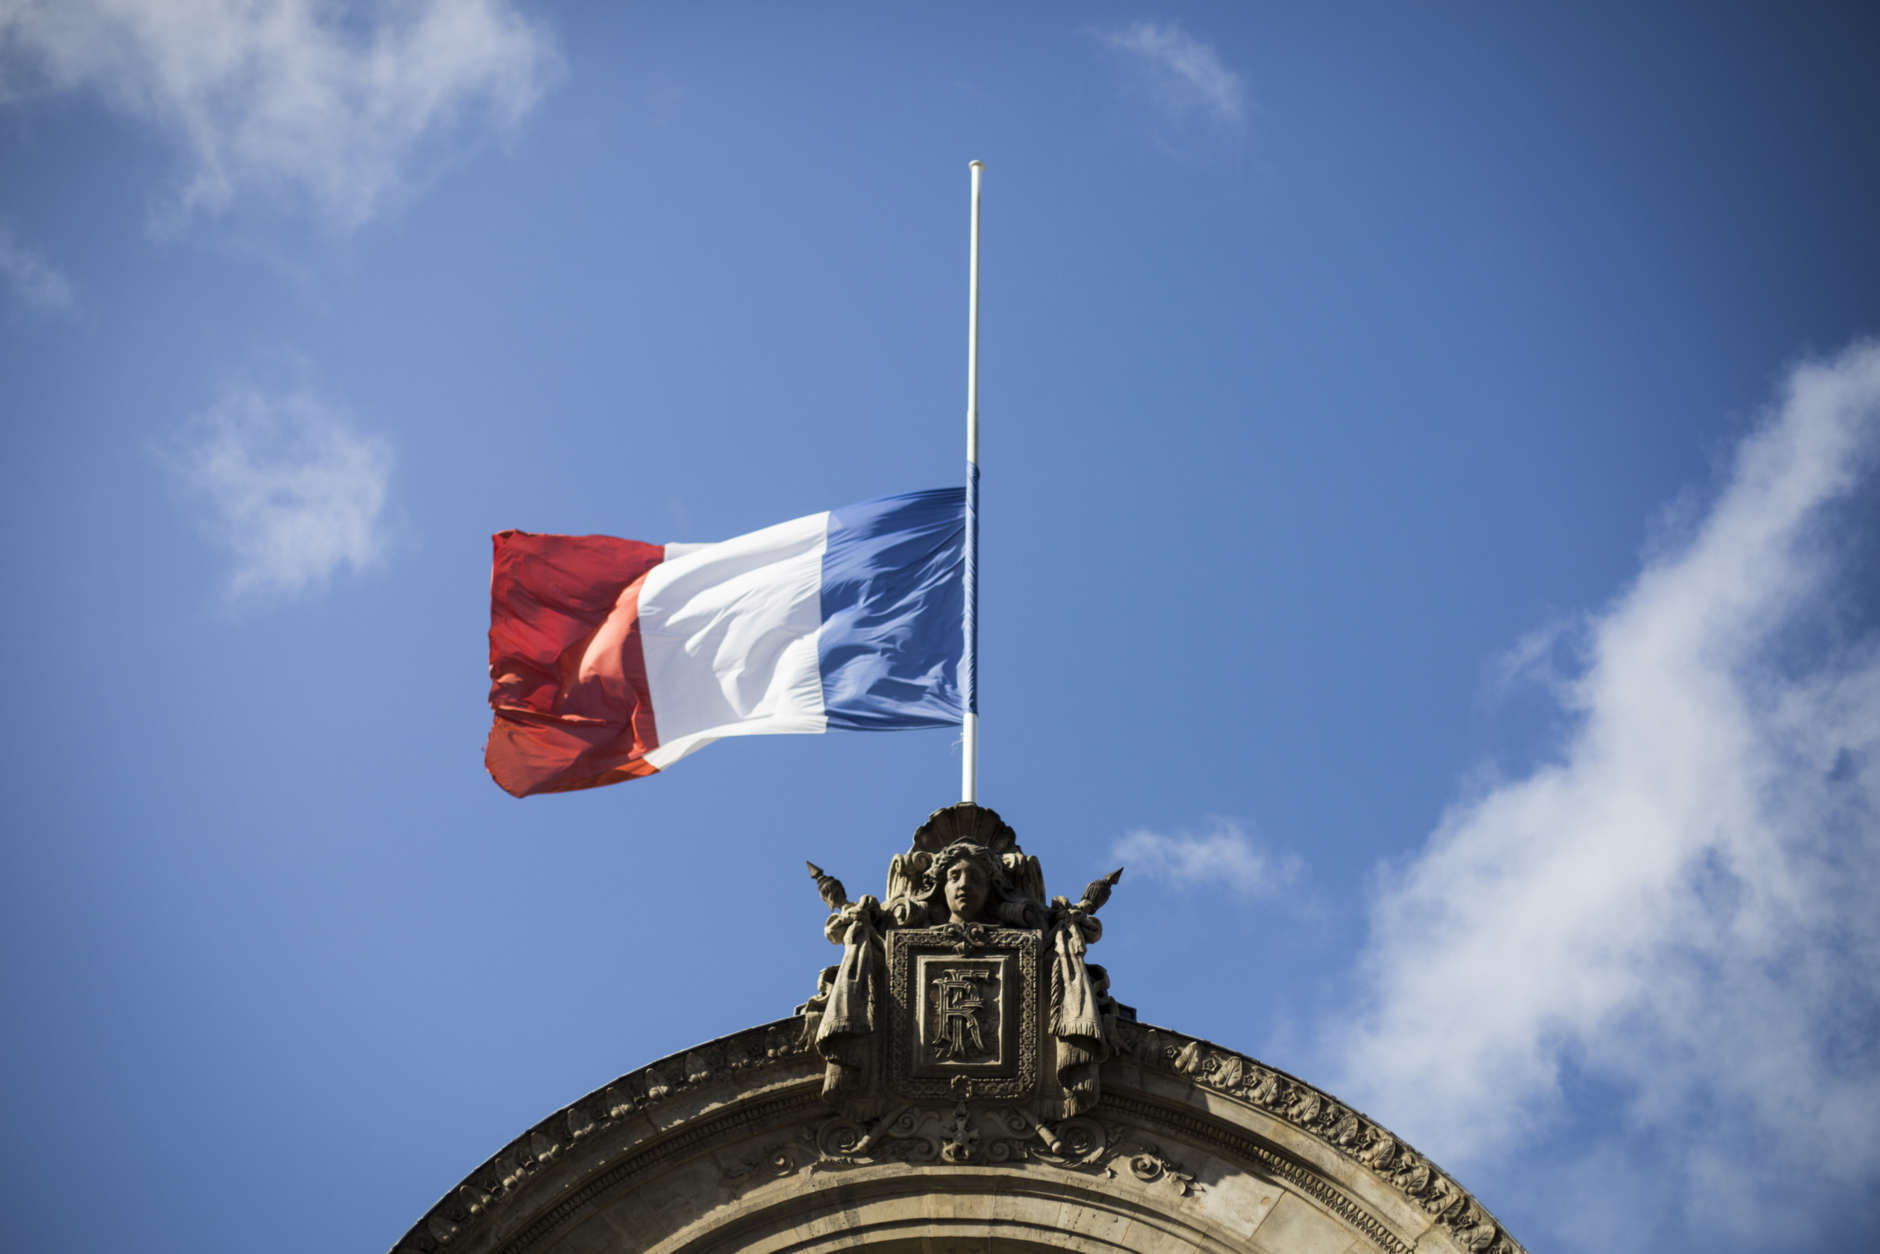 A French flag flies at half-staff for the victims of the Spain attacks, on the Elysee Palace, in Paris, Saturday, Aug. 19, 2017. Police on Friday shot and killed five people carrying bomb belts who were connected to the Barcelona van attack, as the manhunt intensified for the perpetrators of Europe's latest rampage claimed by the Islamic State group. (AP Photo/Kamil Zihnioglu)